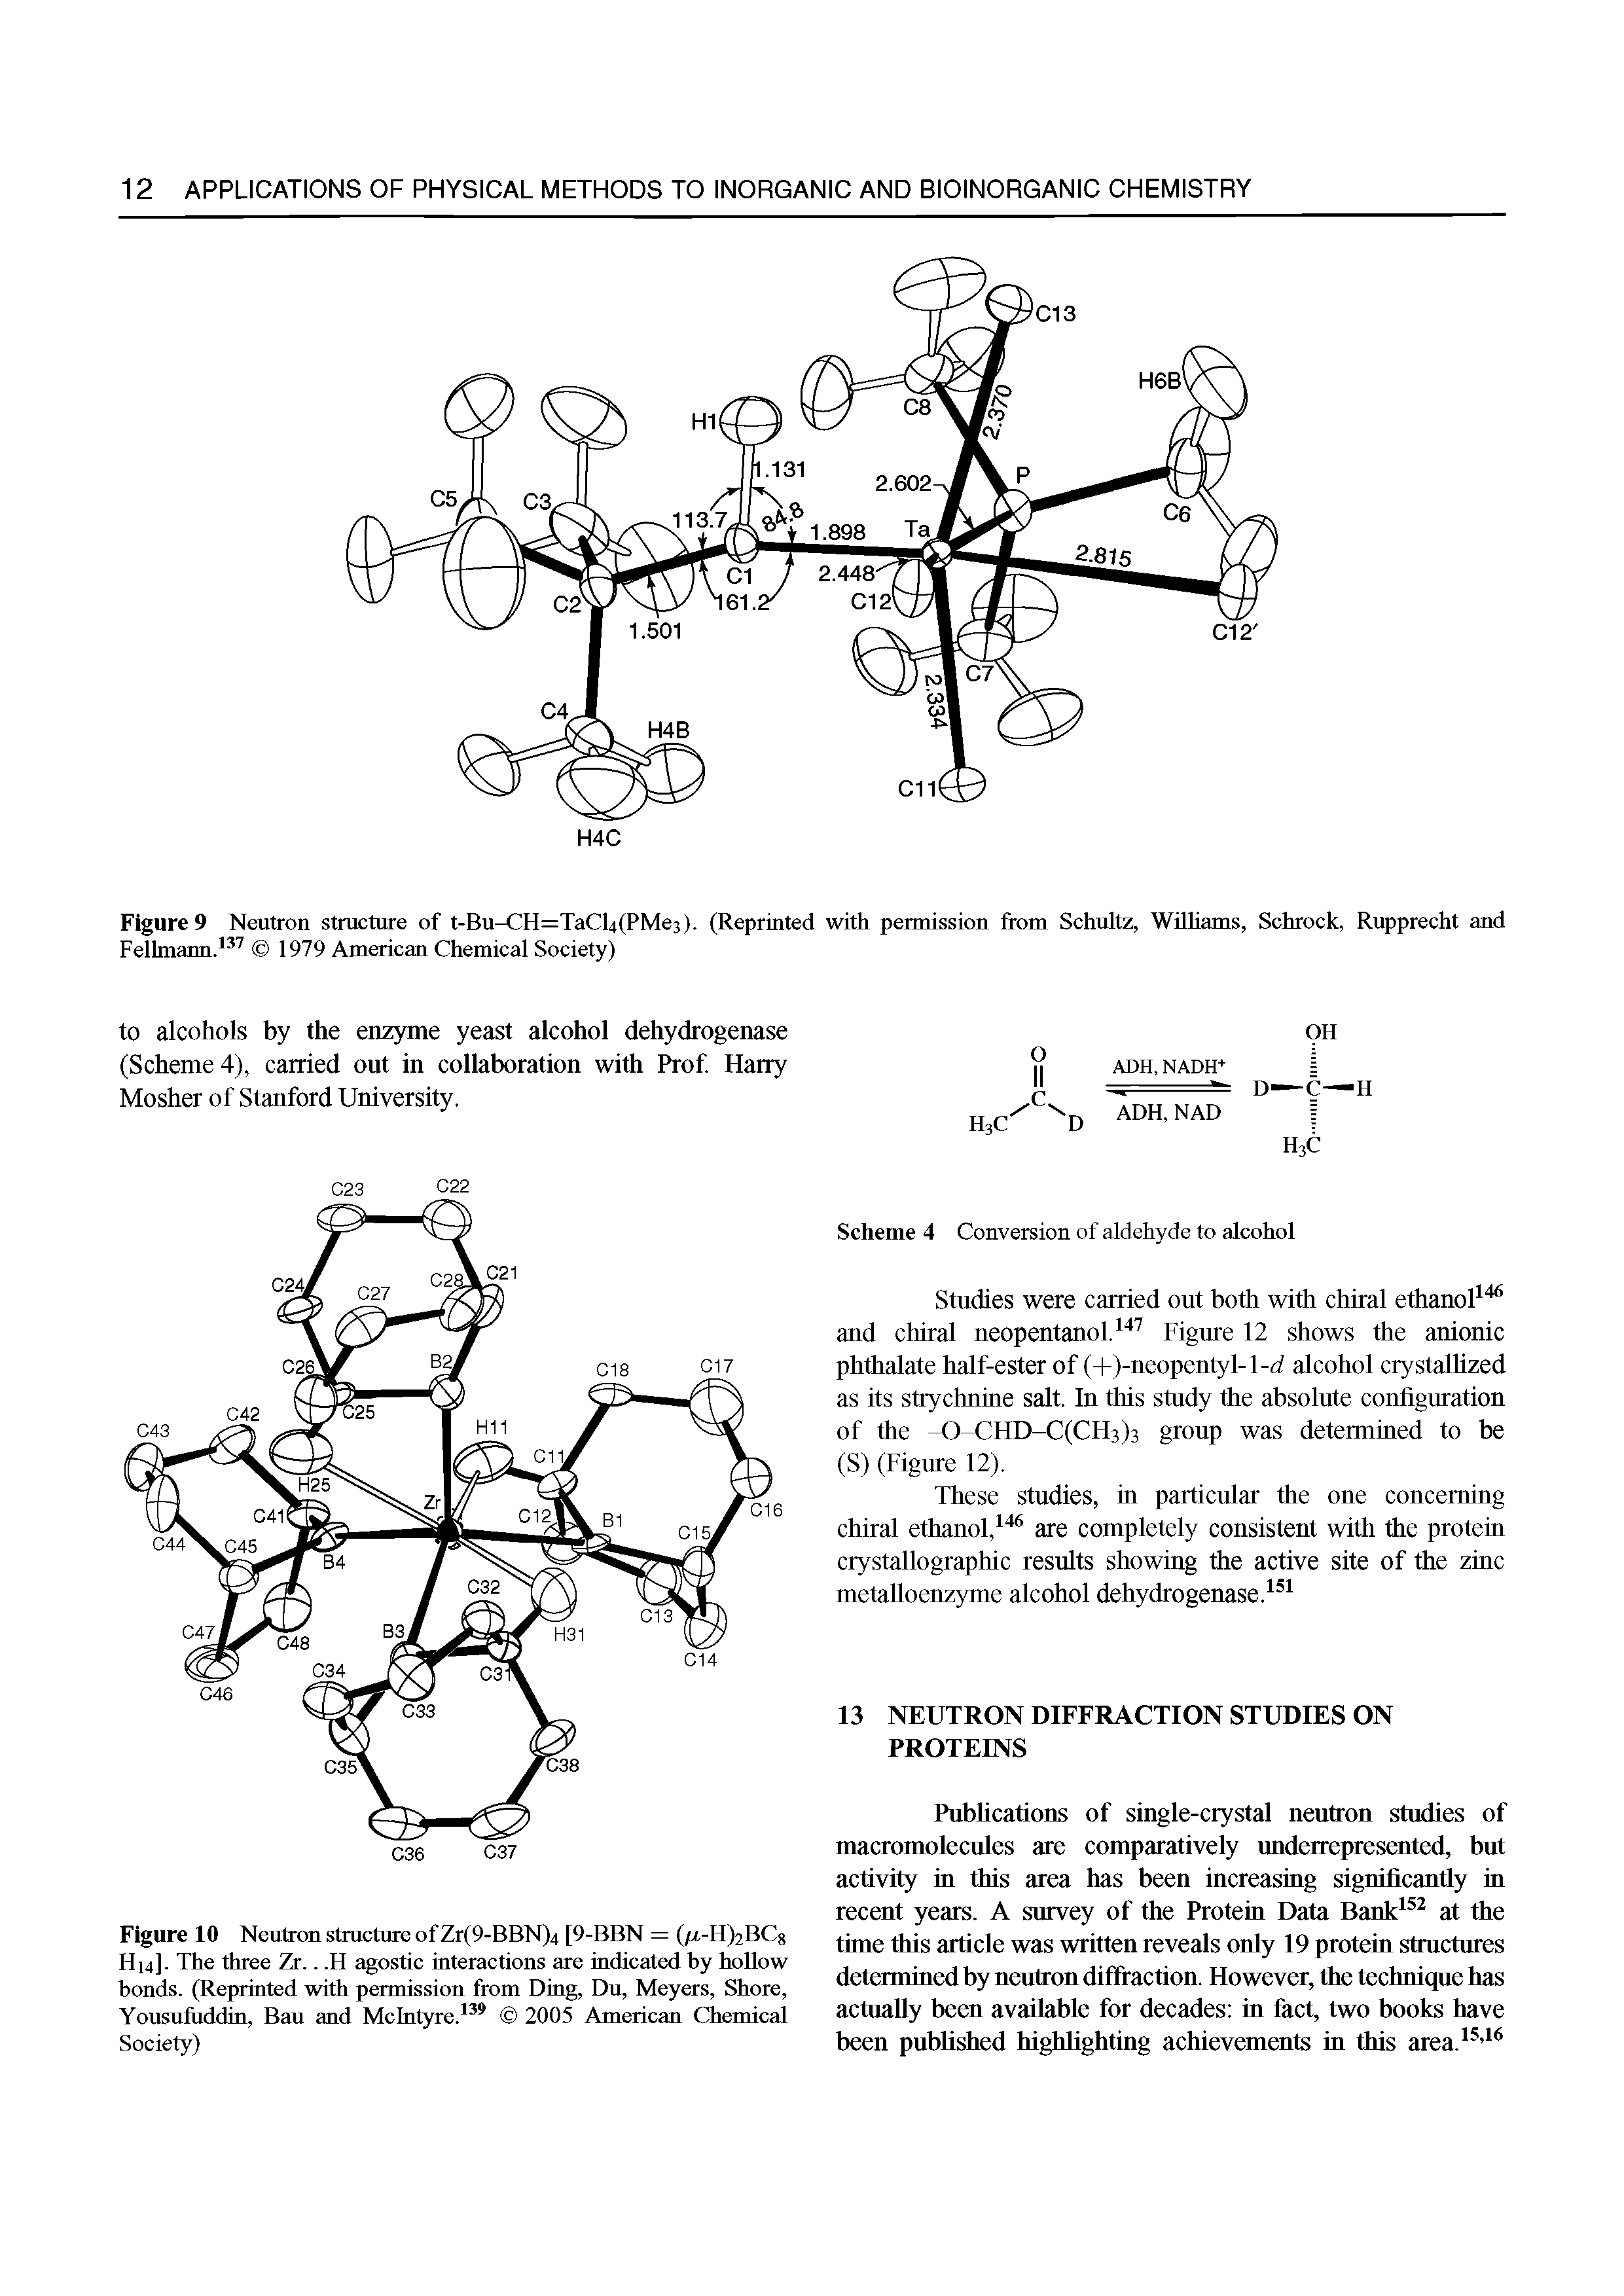 Figure 10 Neutron structure of Zr(9-BBN)4 [9-BBN = (/r-H)2BC8 H14]. The three Zr... H agostic interactions are indicated hy hollow bonds. (Reprinted with permission from Ding, Du, Meyers, Shore, Yousufiiddin, Bau and McIntyre. 2005 American Chemical Society)...